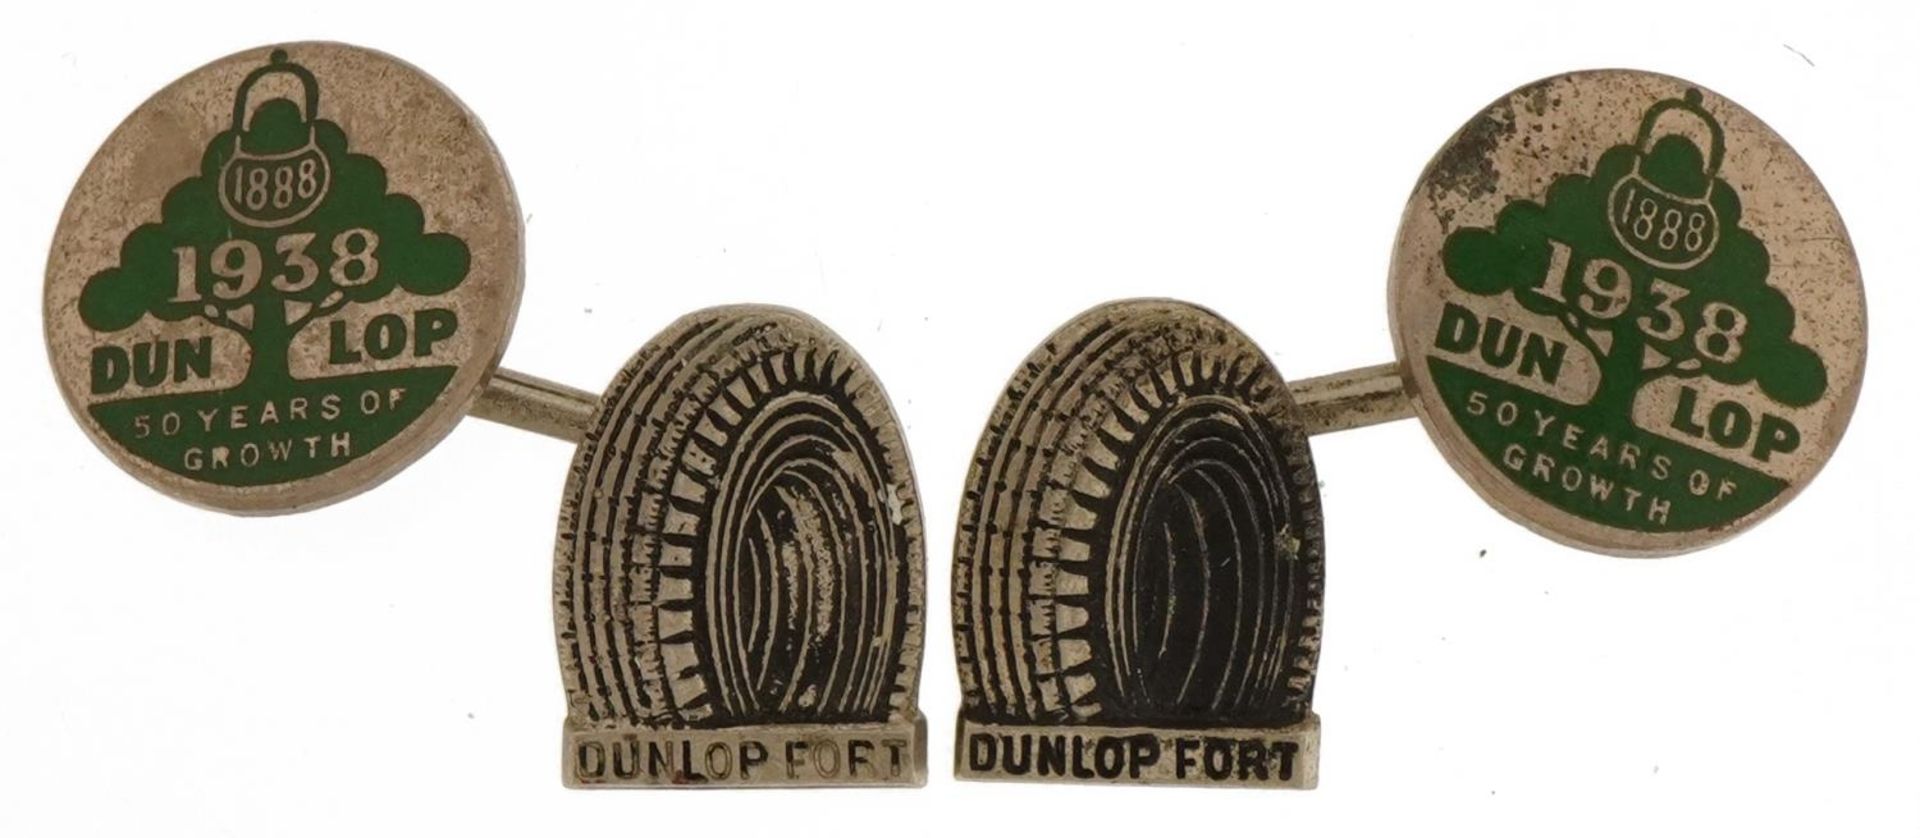 Pair of Dunlop 1888-1938 Fifty Years of Growth enamelled cufflinks, 1.5cm in diameter, 9.3g : For